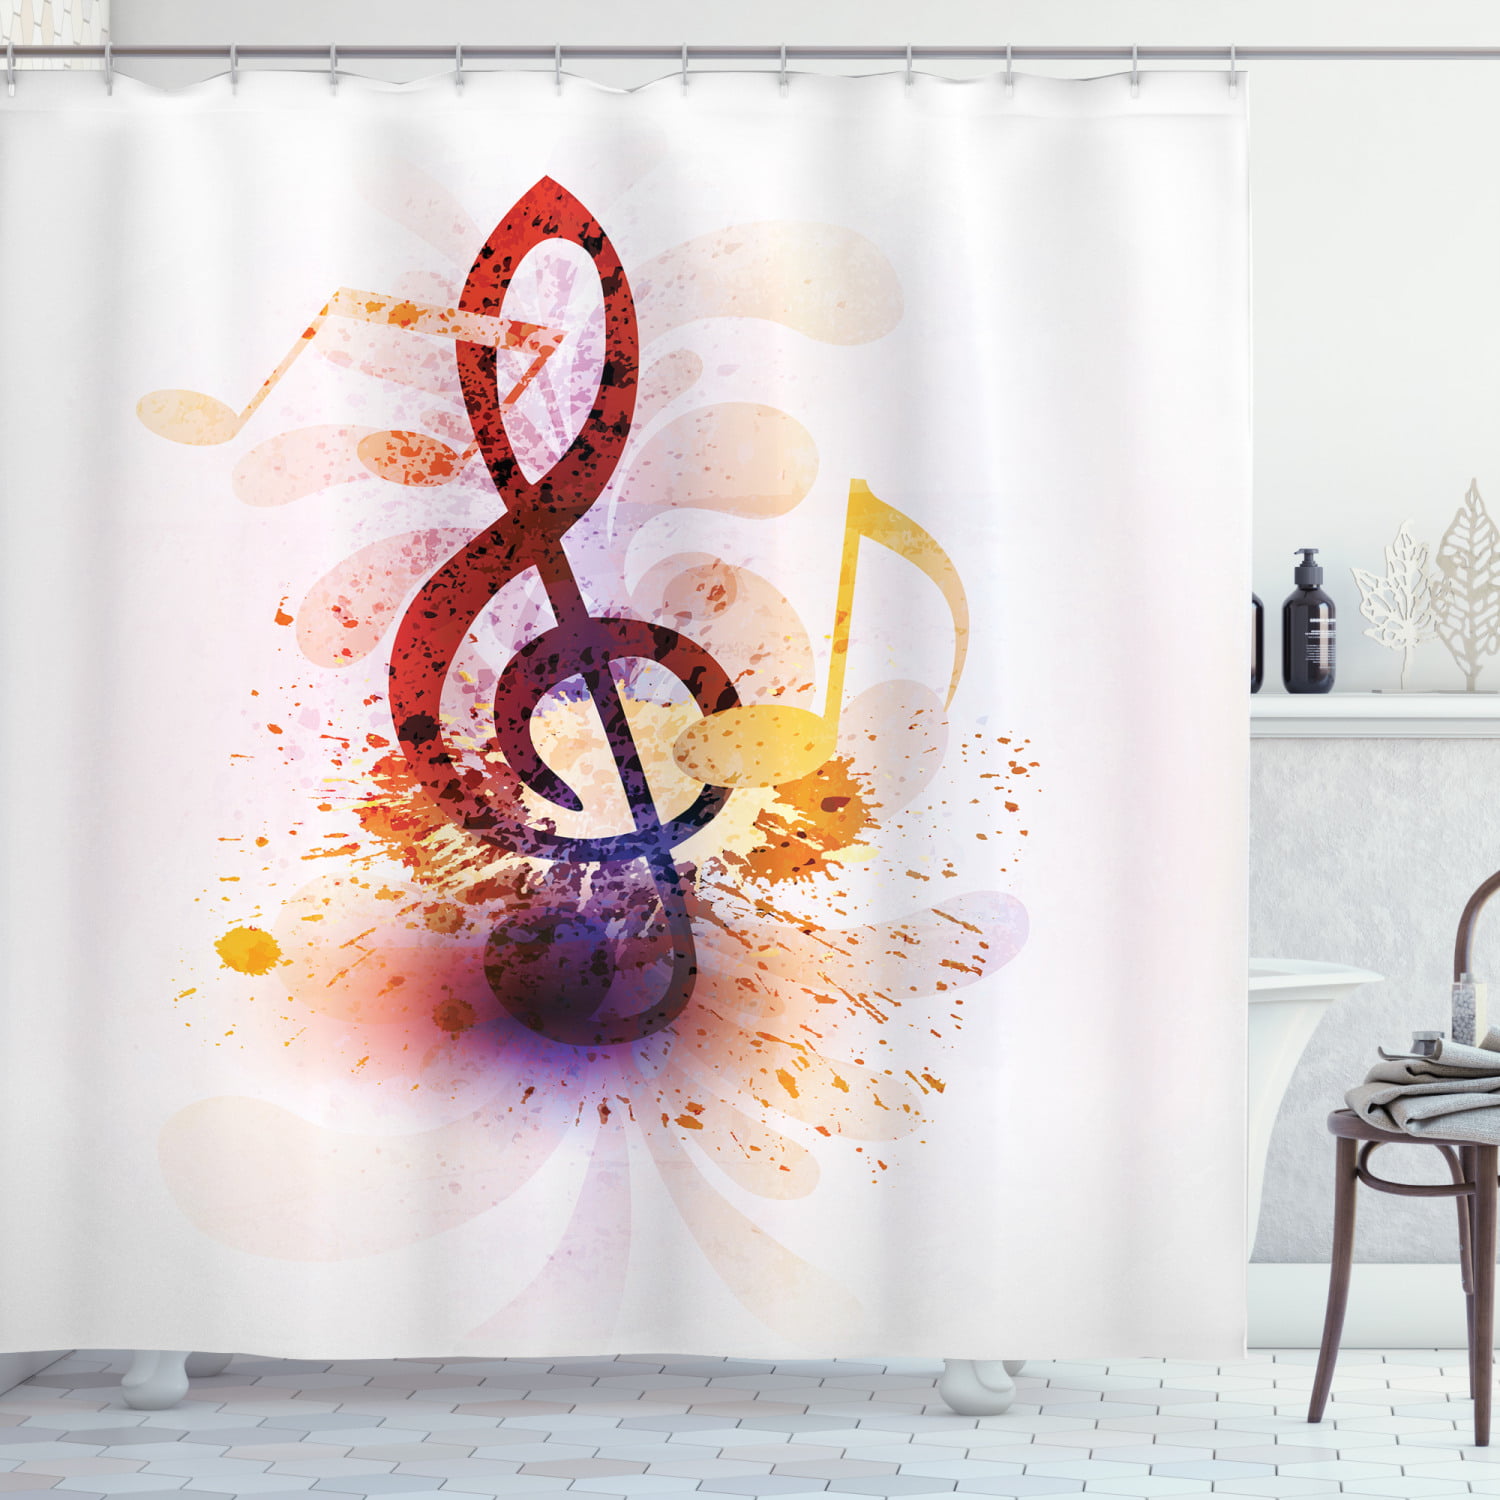 Note Shower Curtain Creative, How To Paint A Fabric Shower Curtain